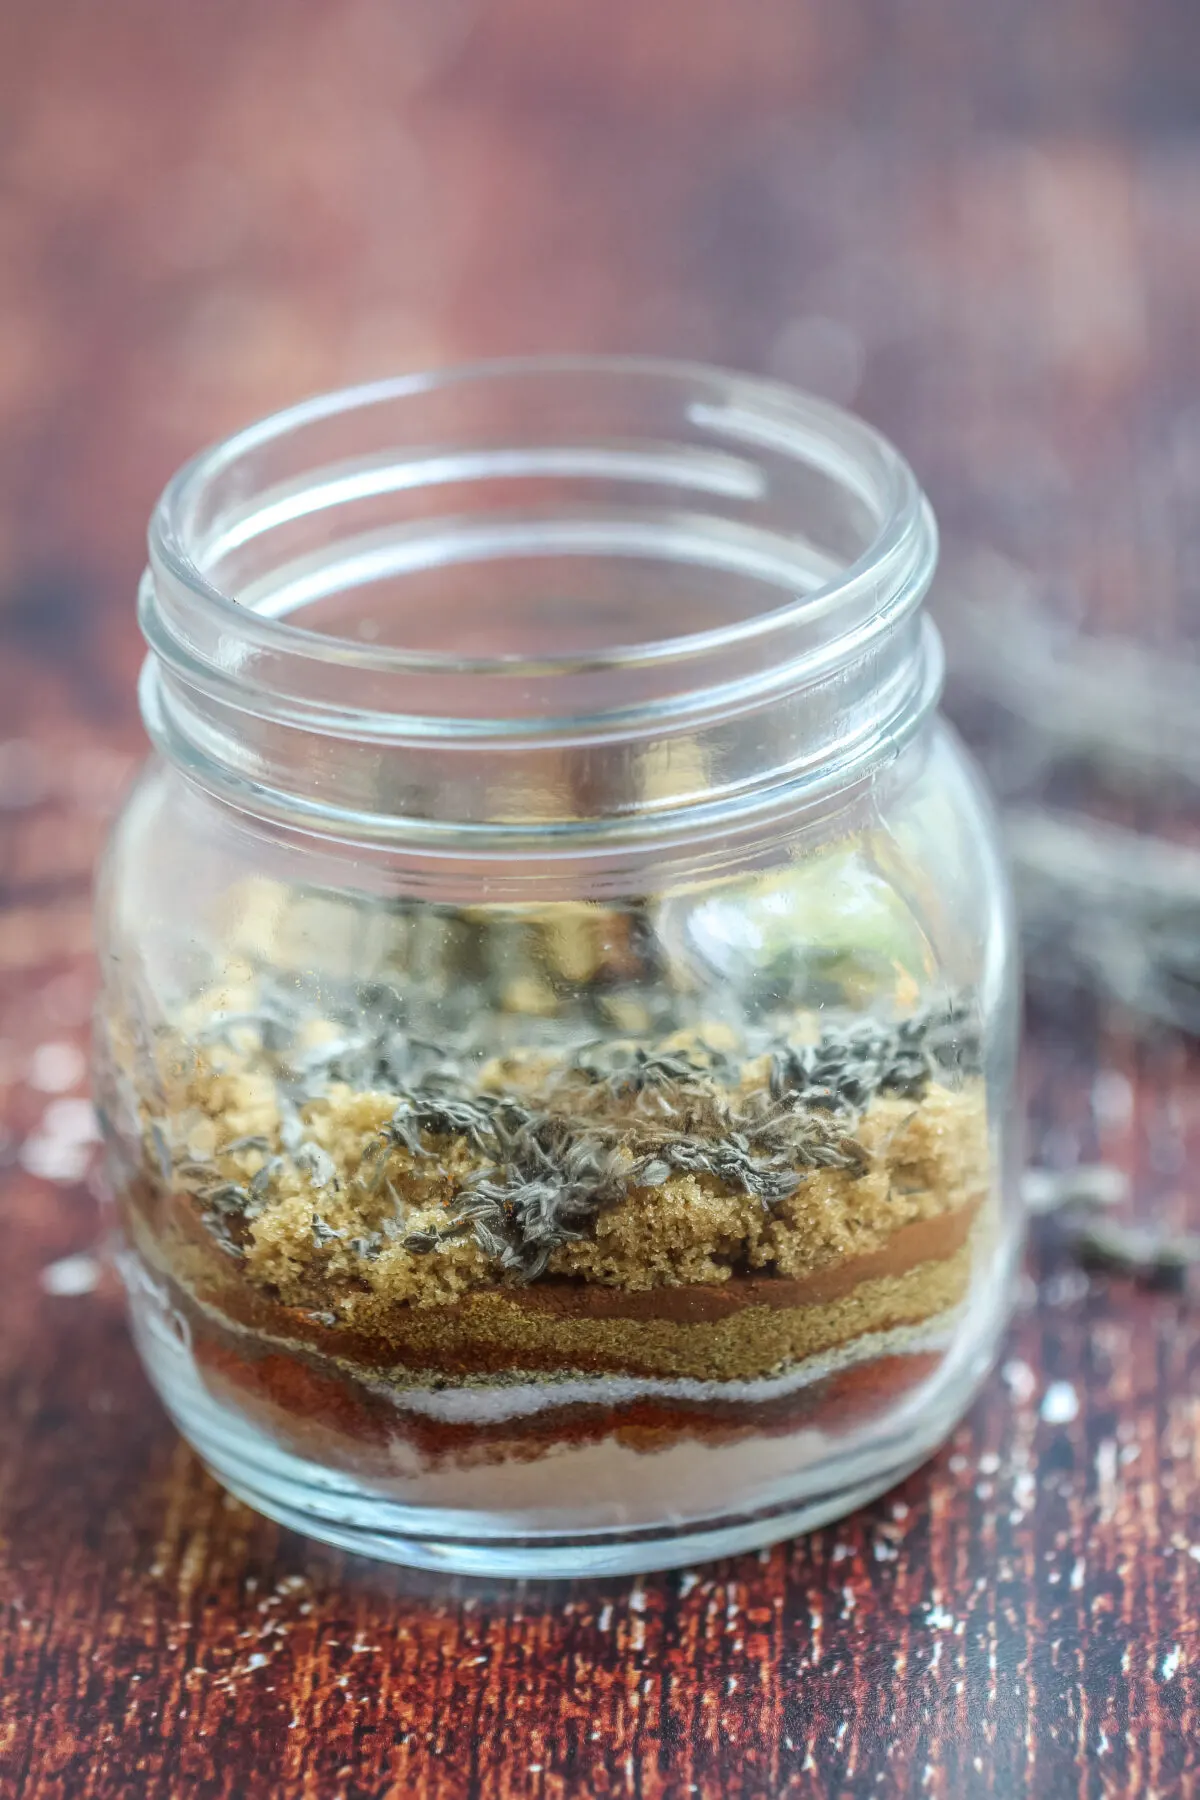 This Jamaican jerk seasoning recipe is a simple but tasty homemade recipe. Great to have on hand when you want that Island flavour!